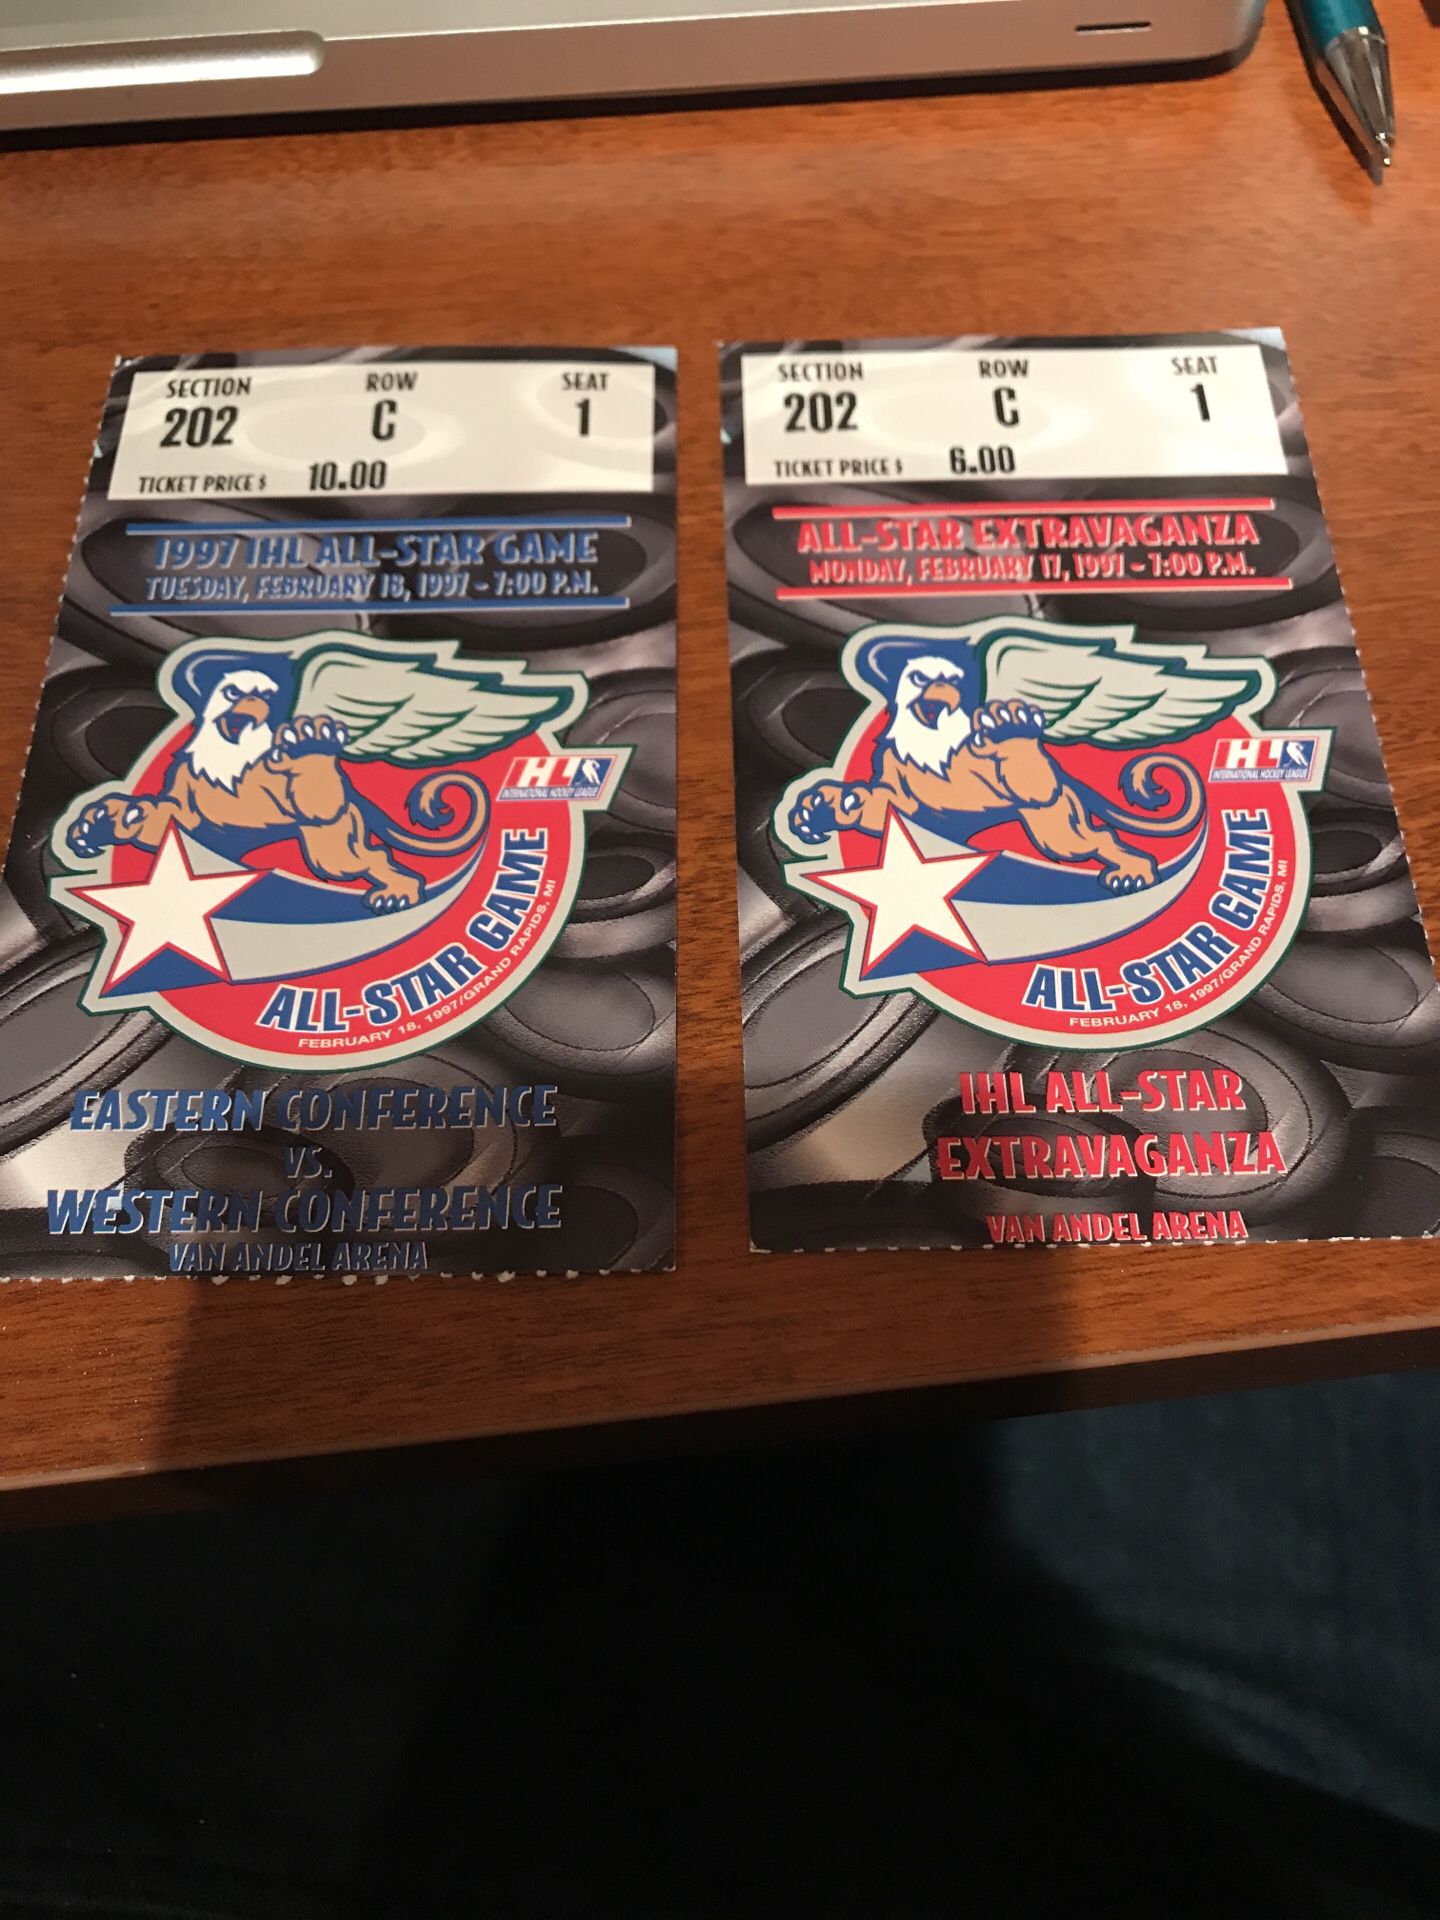 Ticket stubs from 1997 IHL Hockey All Star Game Grand Rapids Griffins